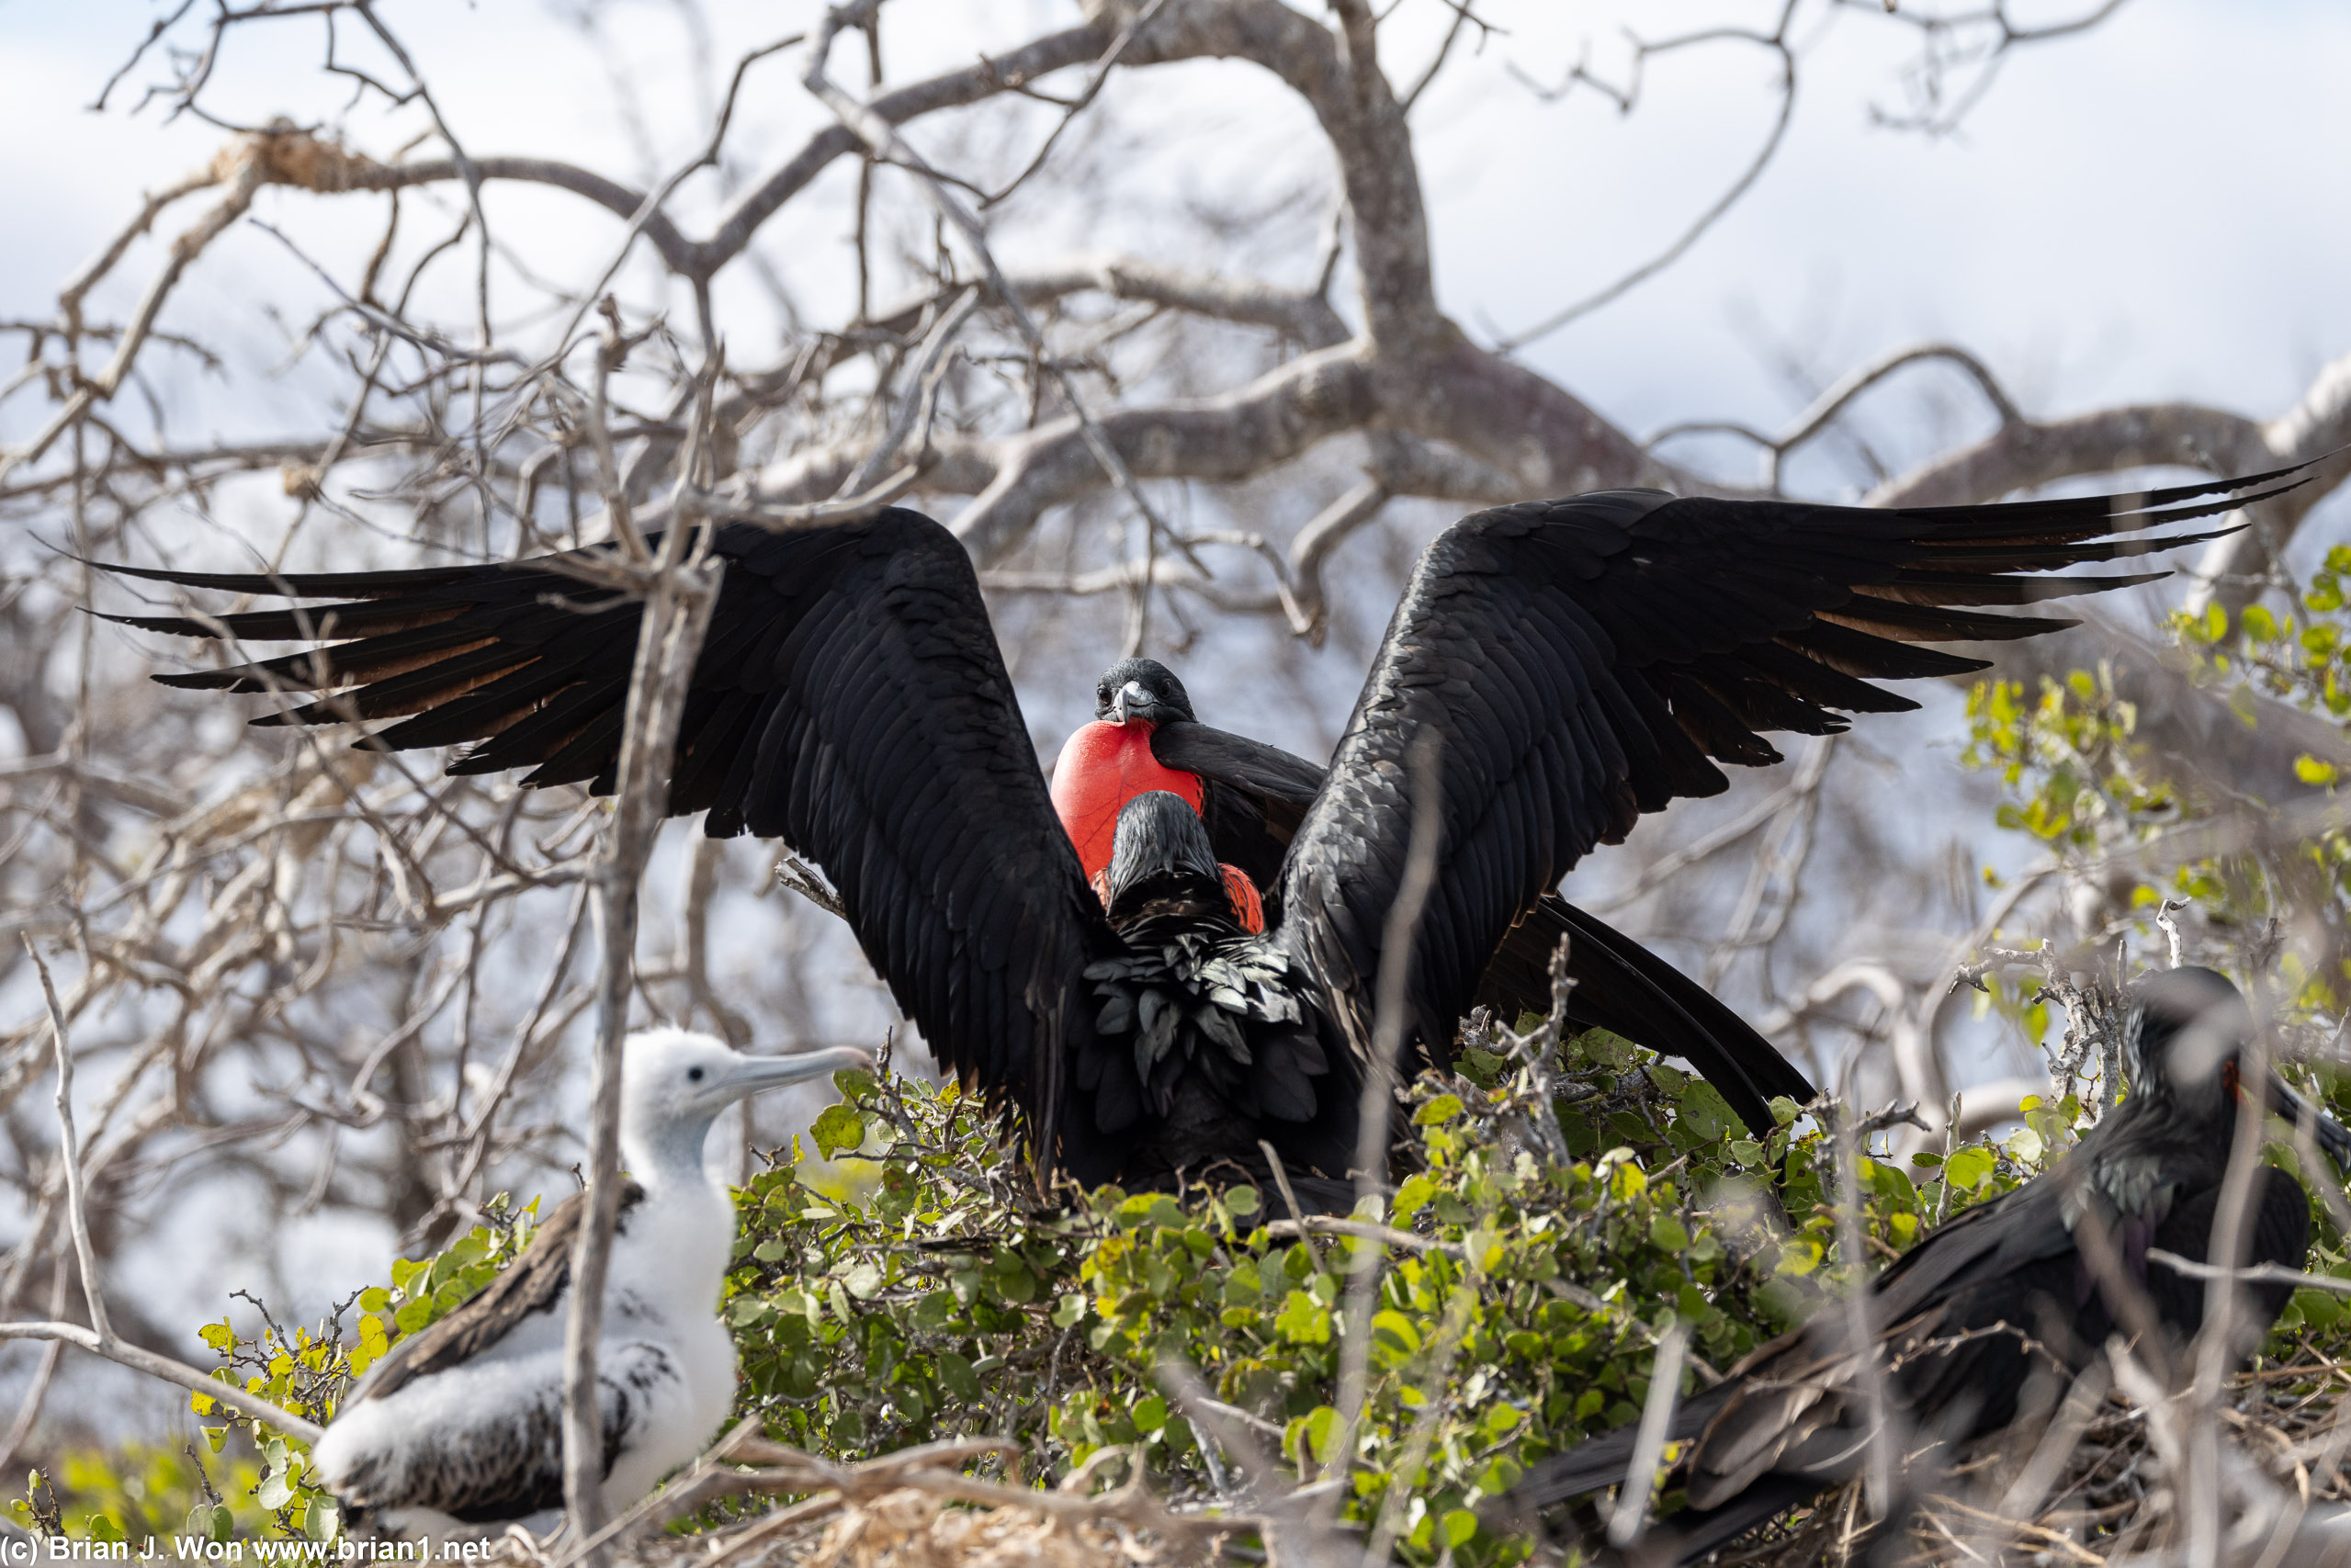 Male magnificent frigatebirds fighting as a chick looks on.